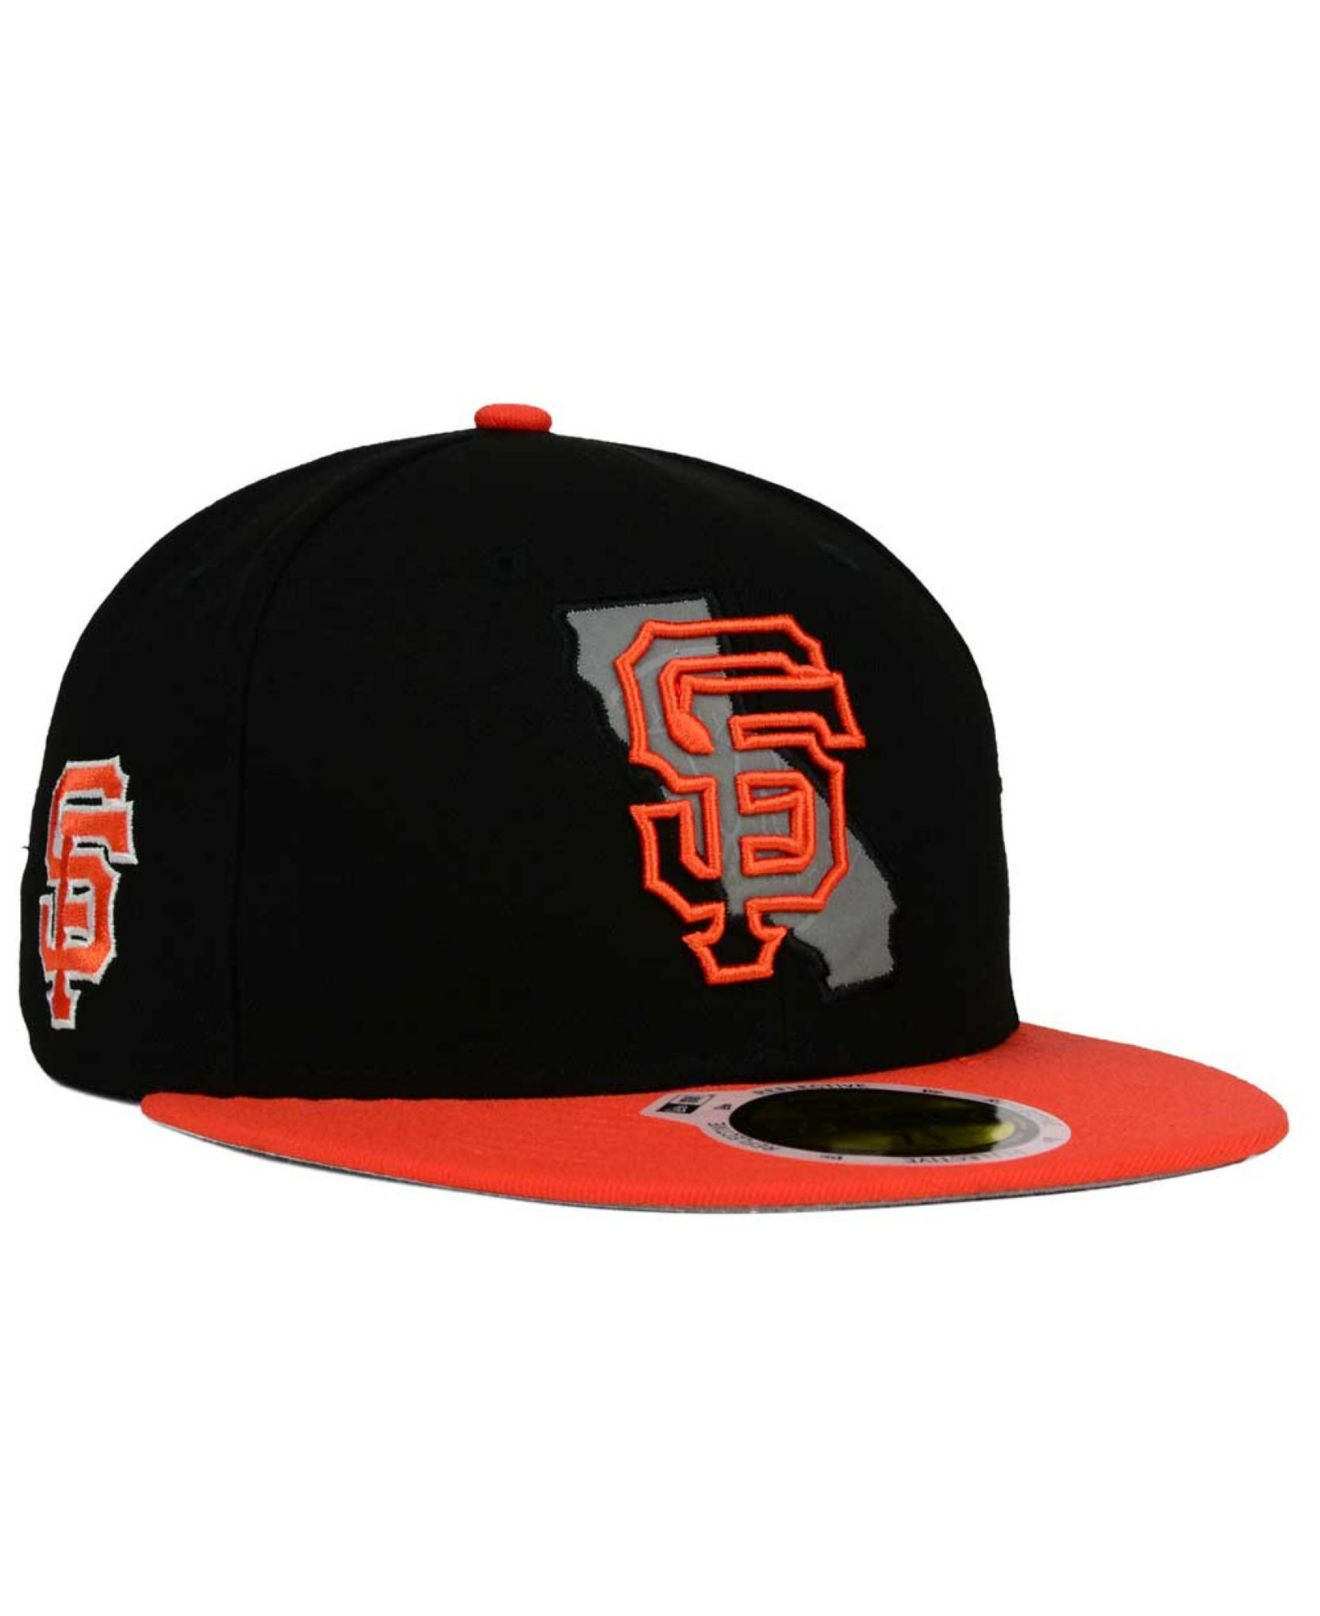 New Era Black San Francisco Giants State Reflective Redux 59fifty Cap Product 1 108439846 Normal 